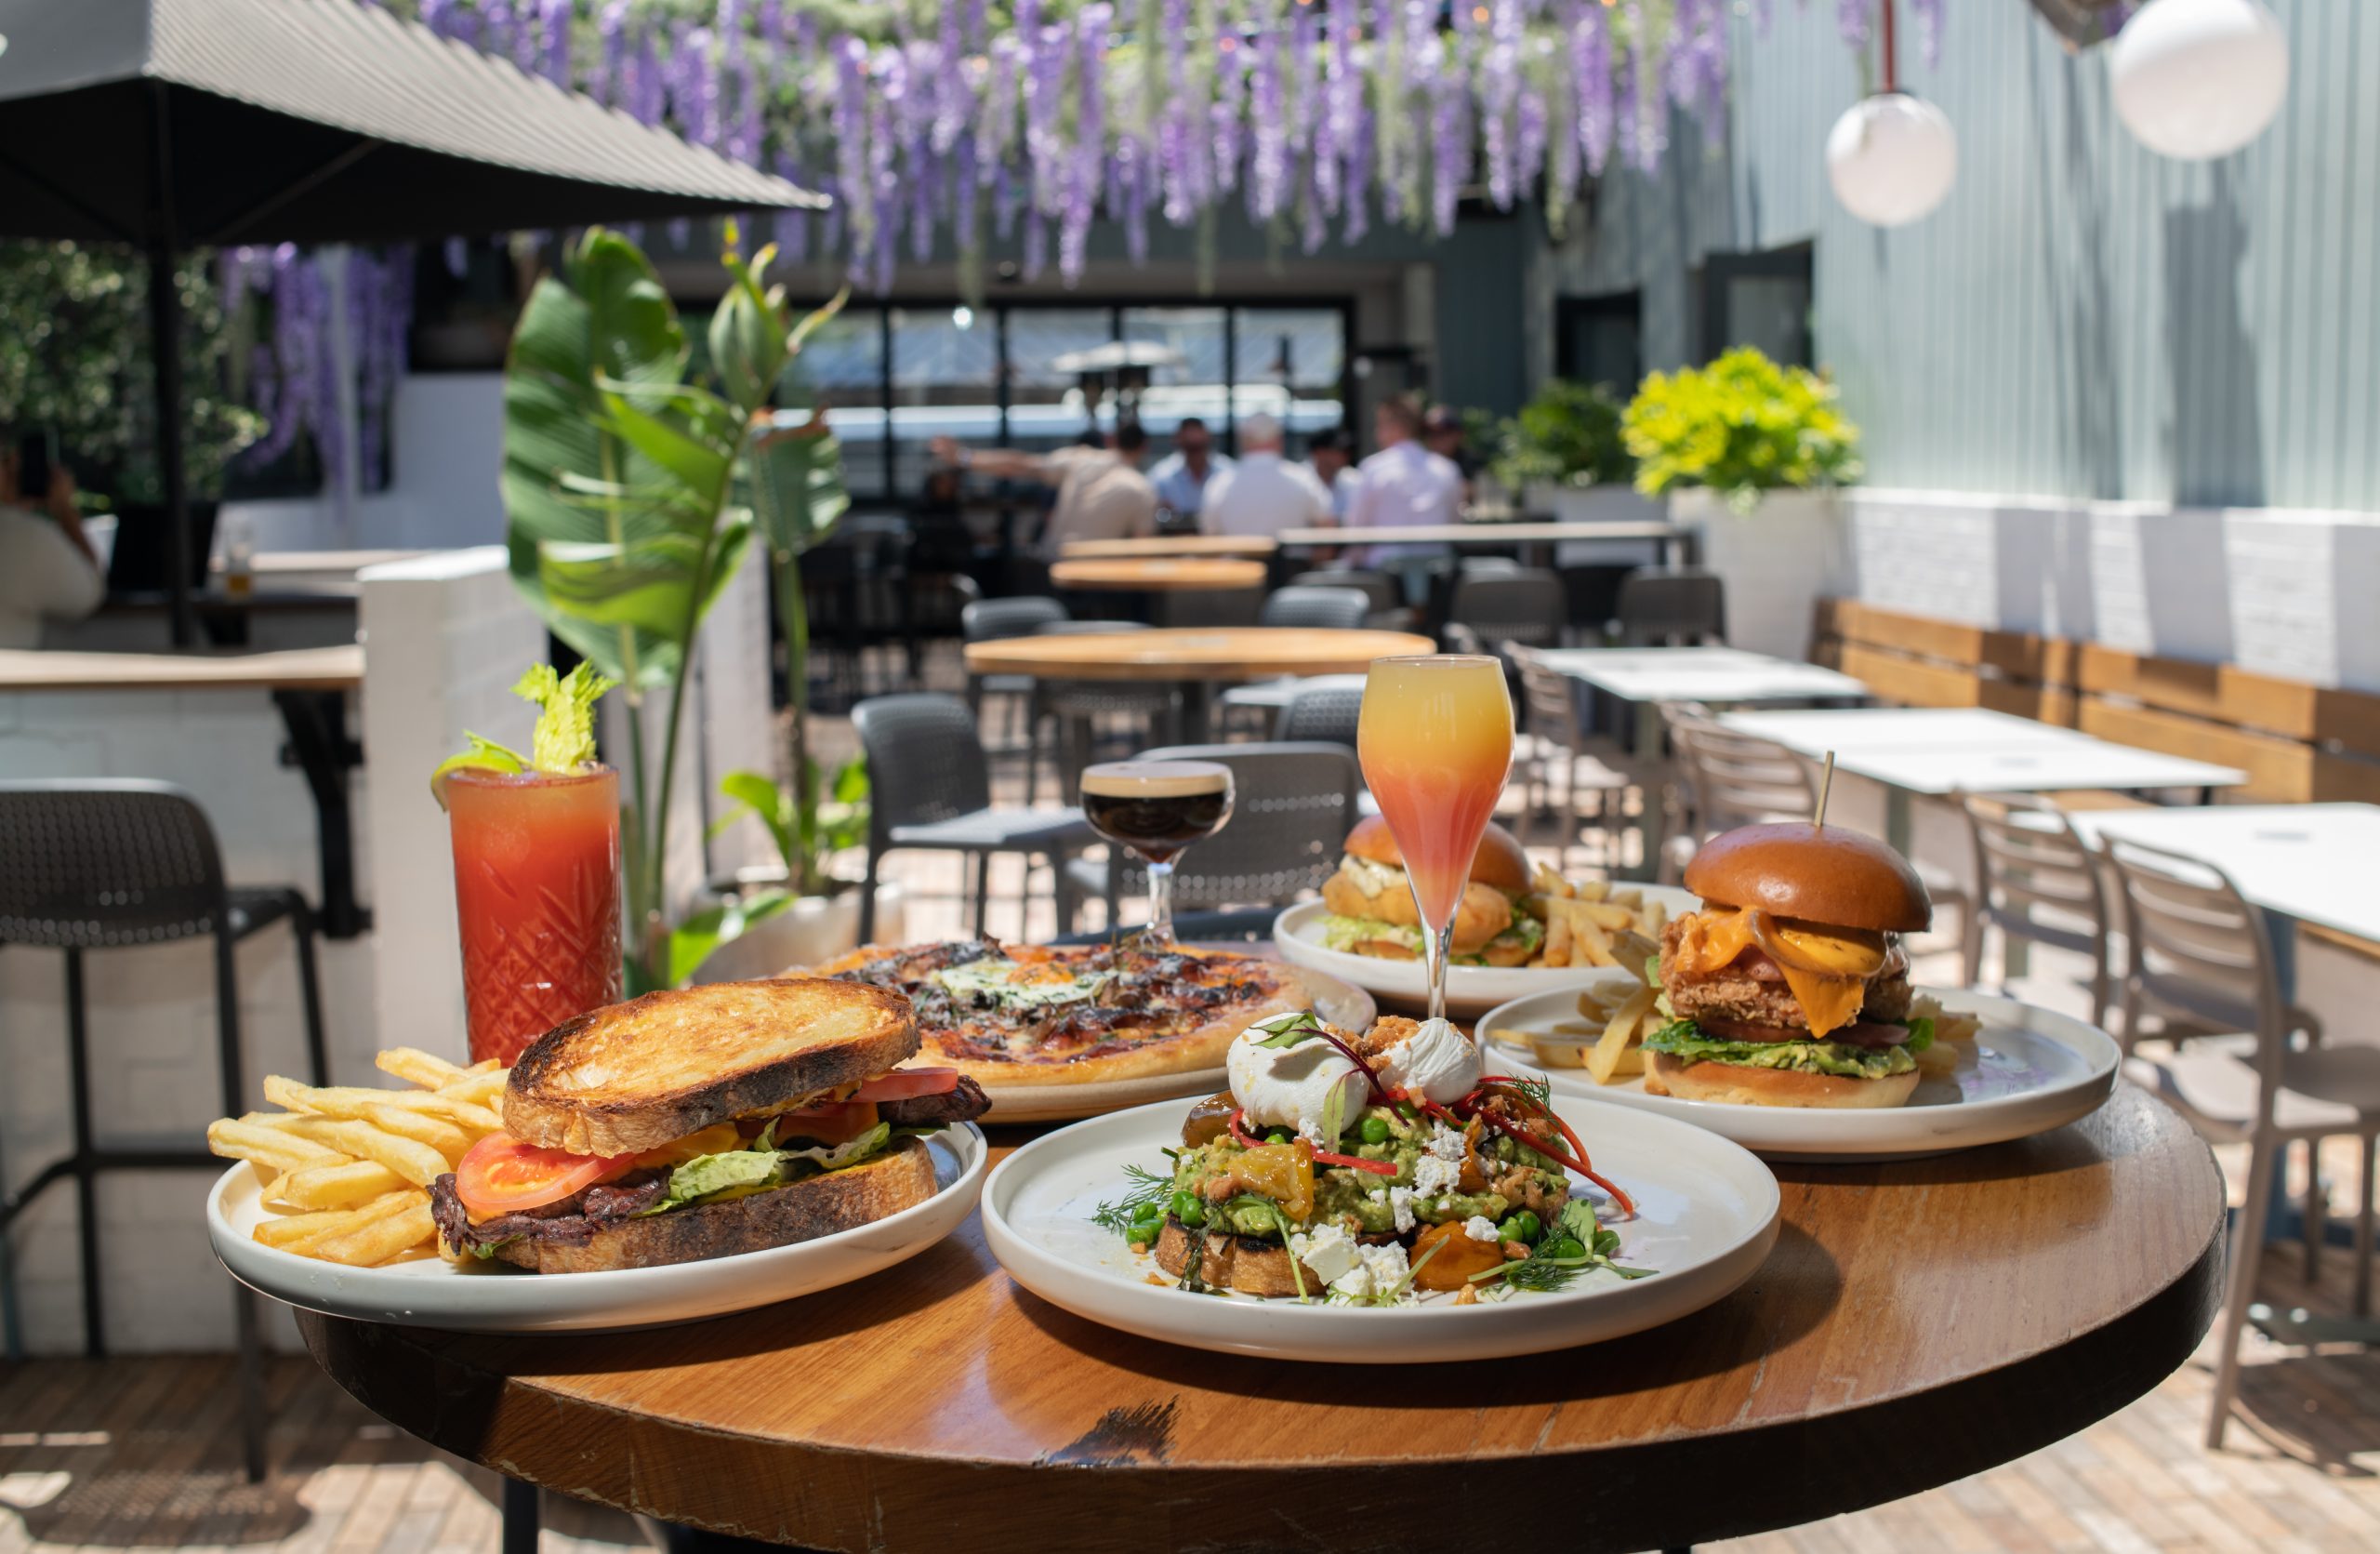 Win A $200 Voucher To Wine and Dine Your Bestie At The Parkside Hotel!